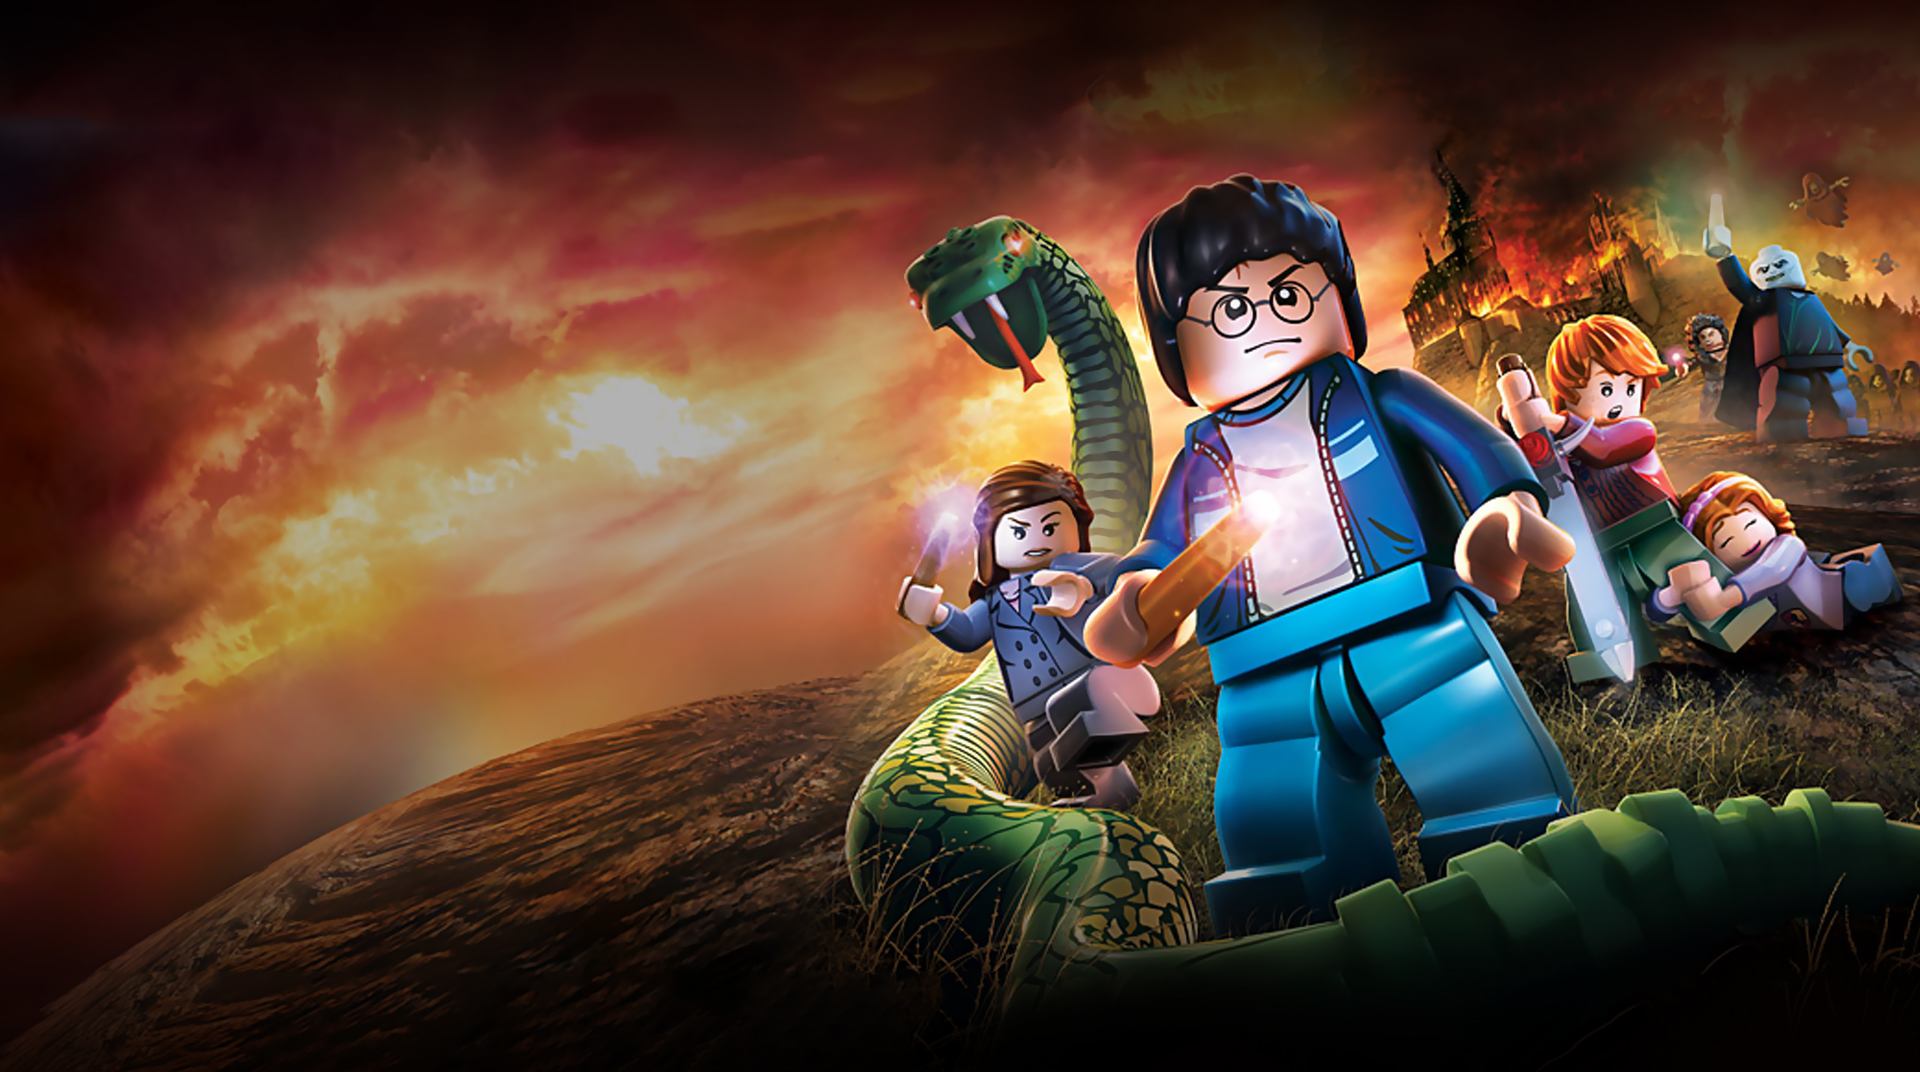 Harry Potter Lego Video Game Years 5 7 - HD Wallpaper 